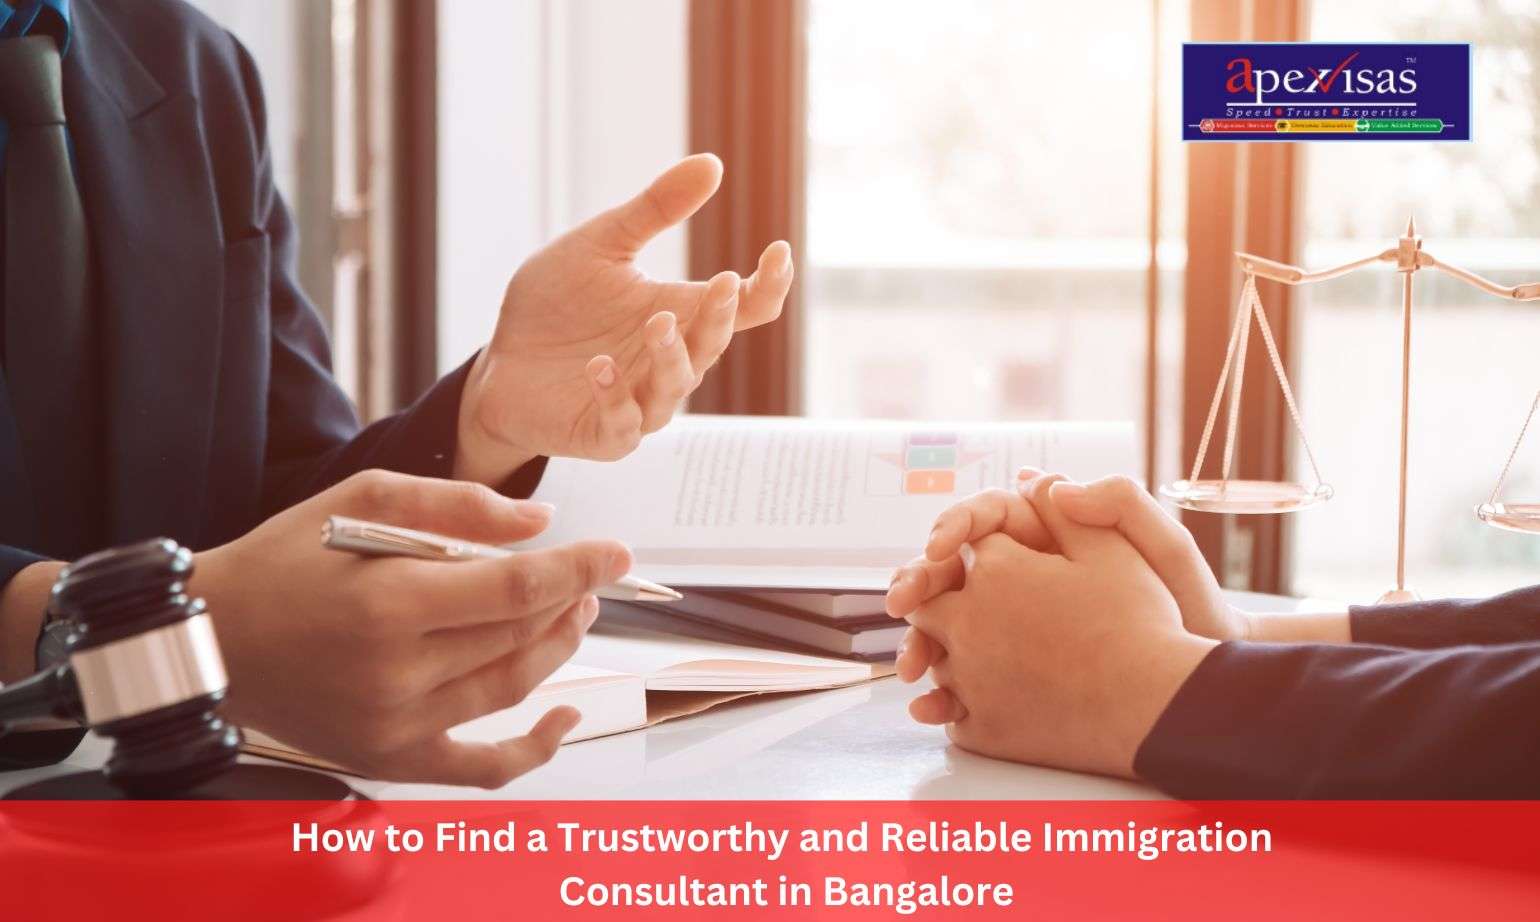 How to Find a Trustworthy and Reliable Immigration Consultant in Bangalore